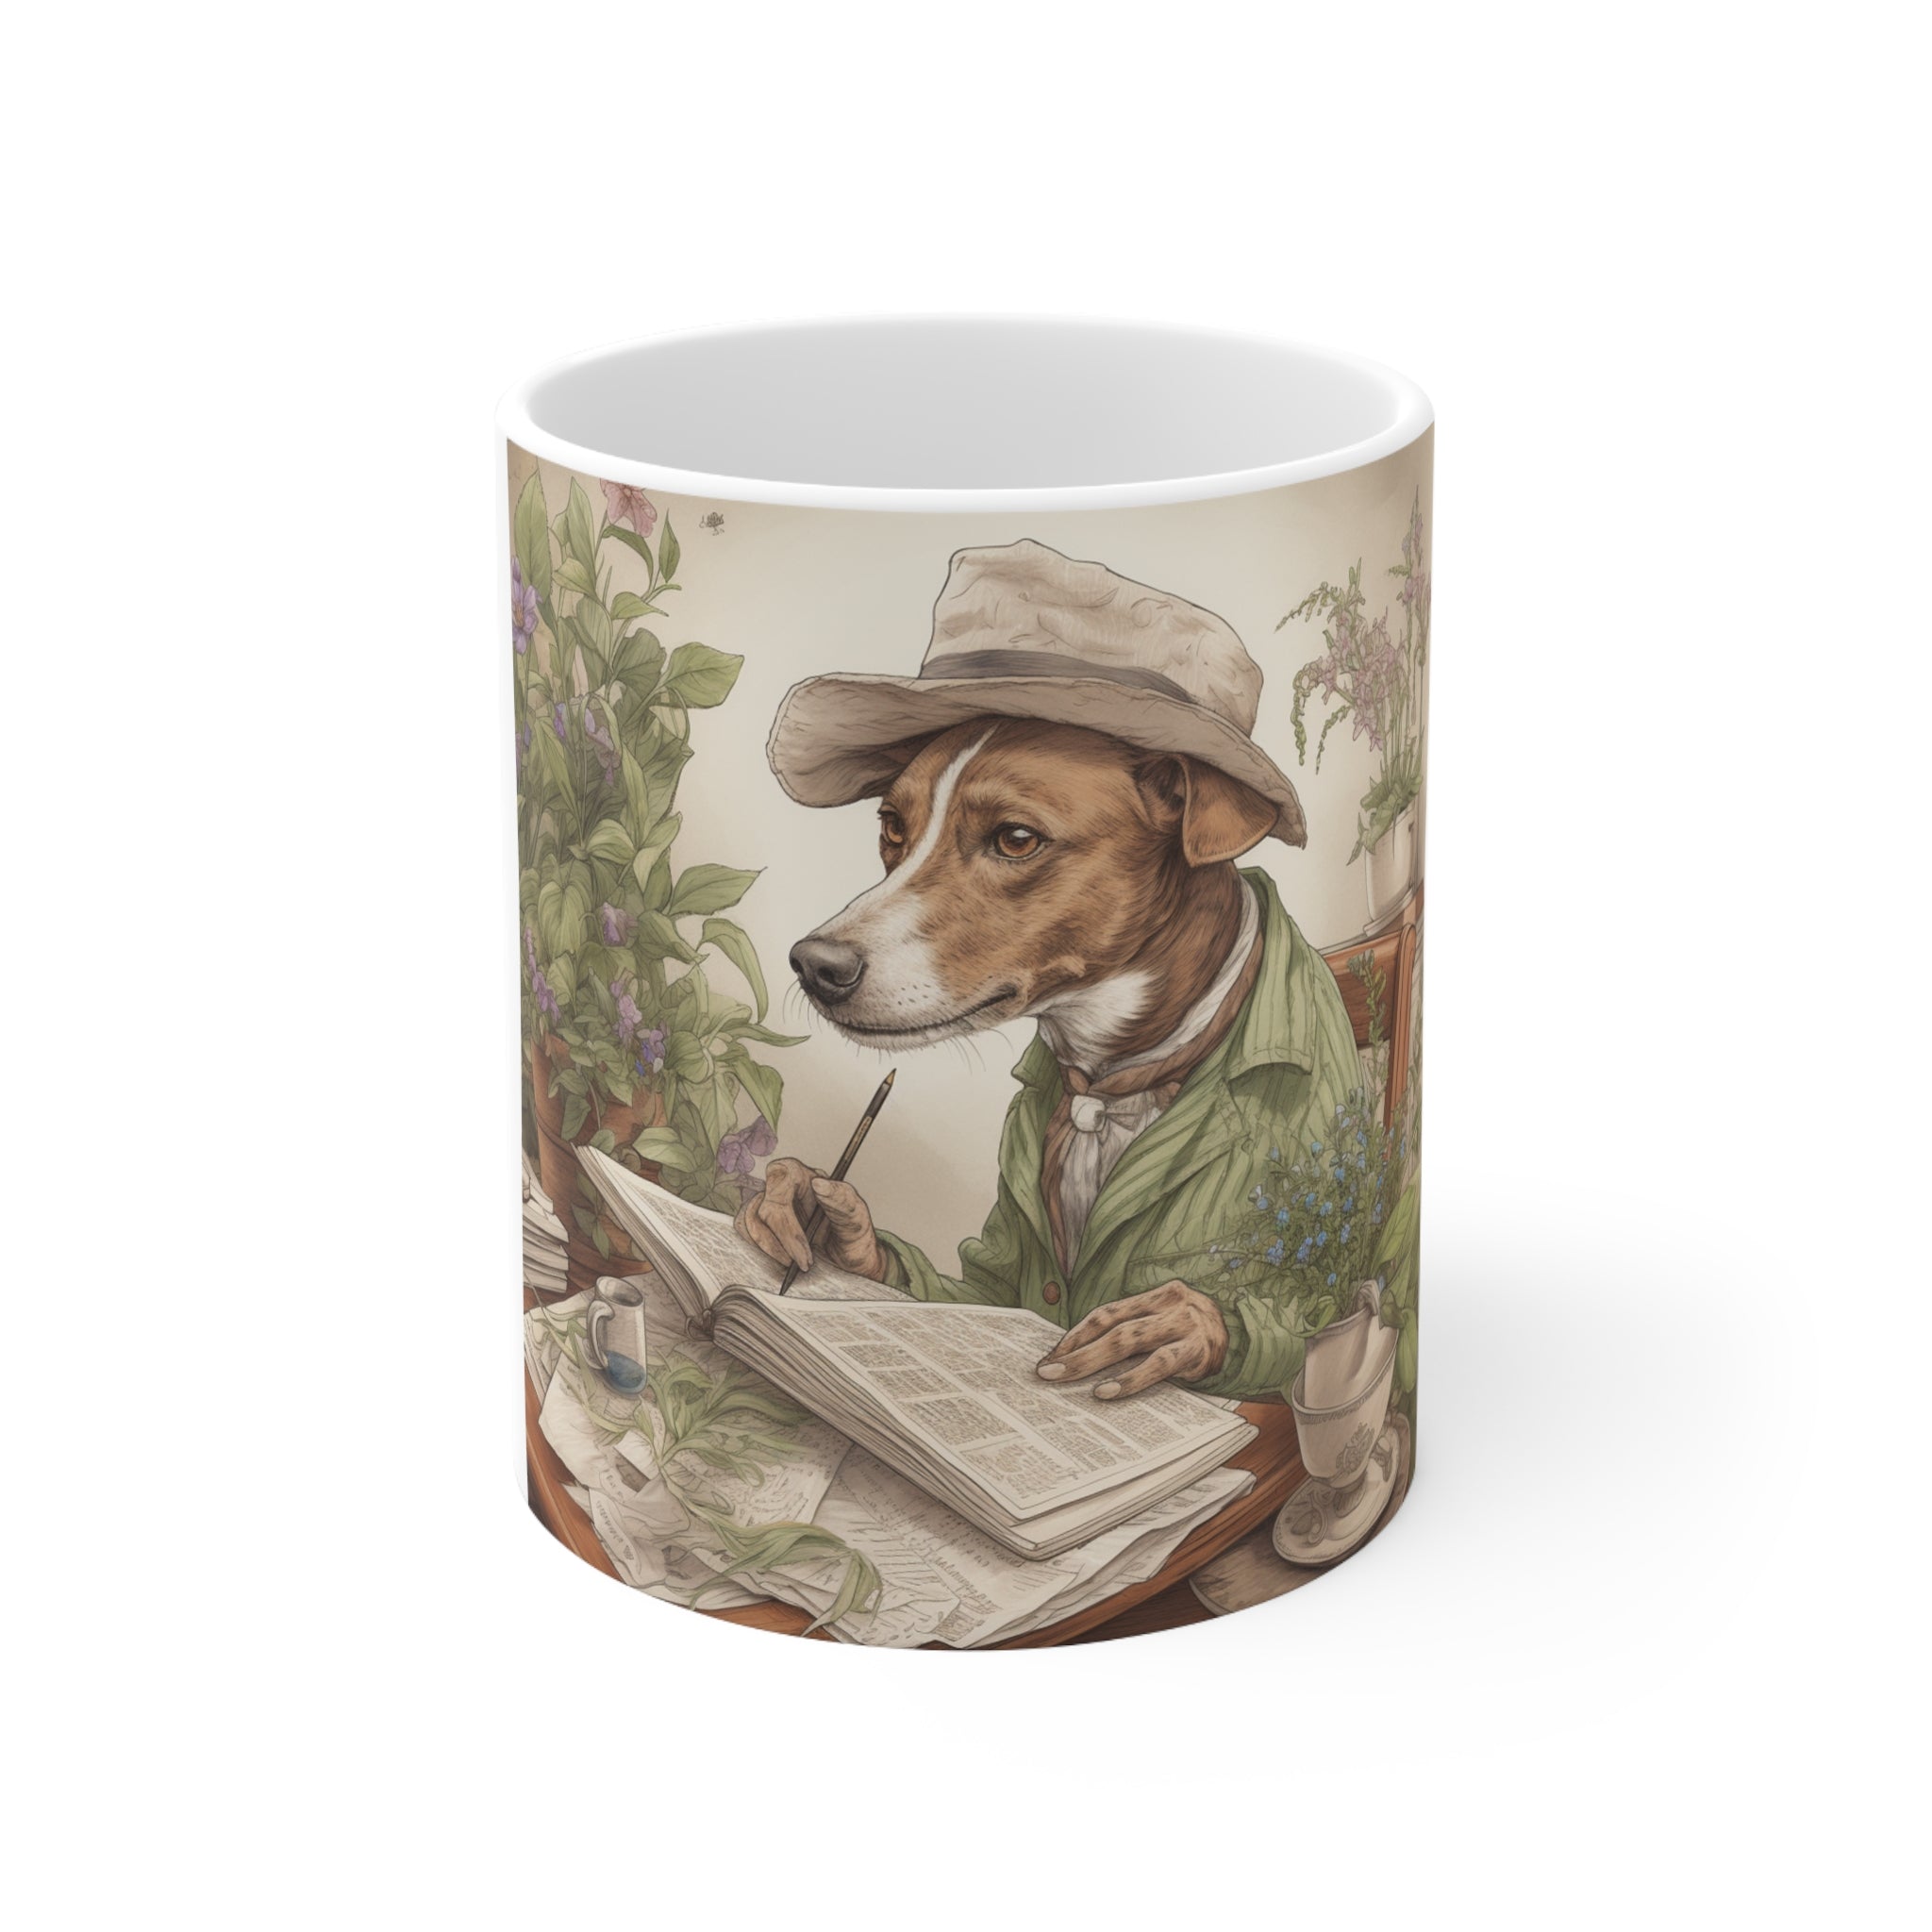 Dog Lovers Coffee Mug 11oz Ceramic Mug Home and Garden Relaxing  | Exclusive Floral Puppy Design | Professional Artwork | Durable & Aesthetic Drinkware